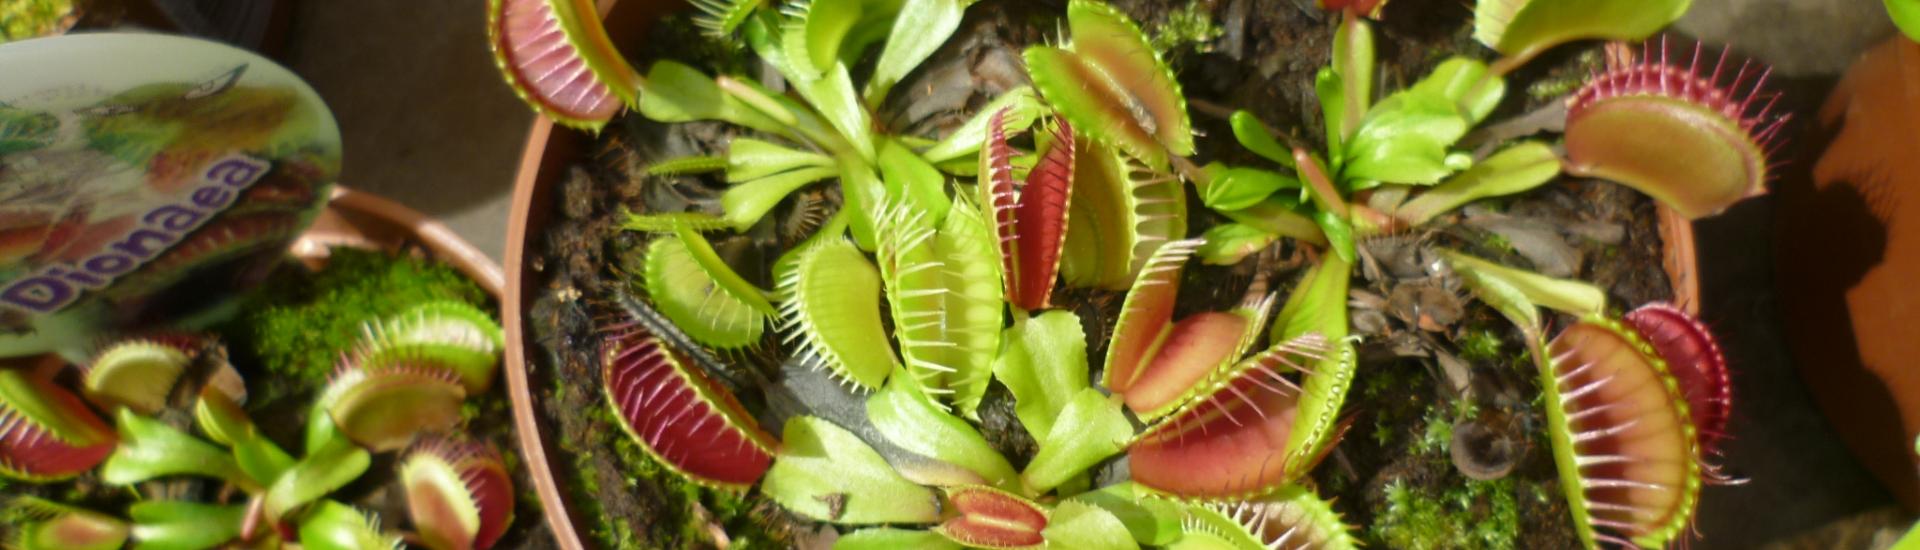 Garden Q&A: Amazing Venus fly traps have a taste for protein